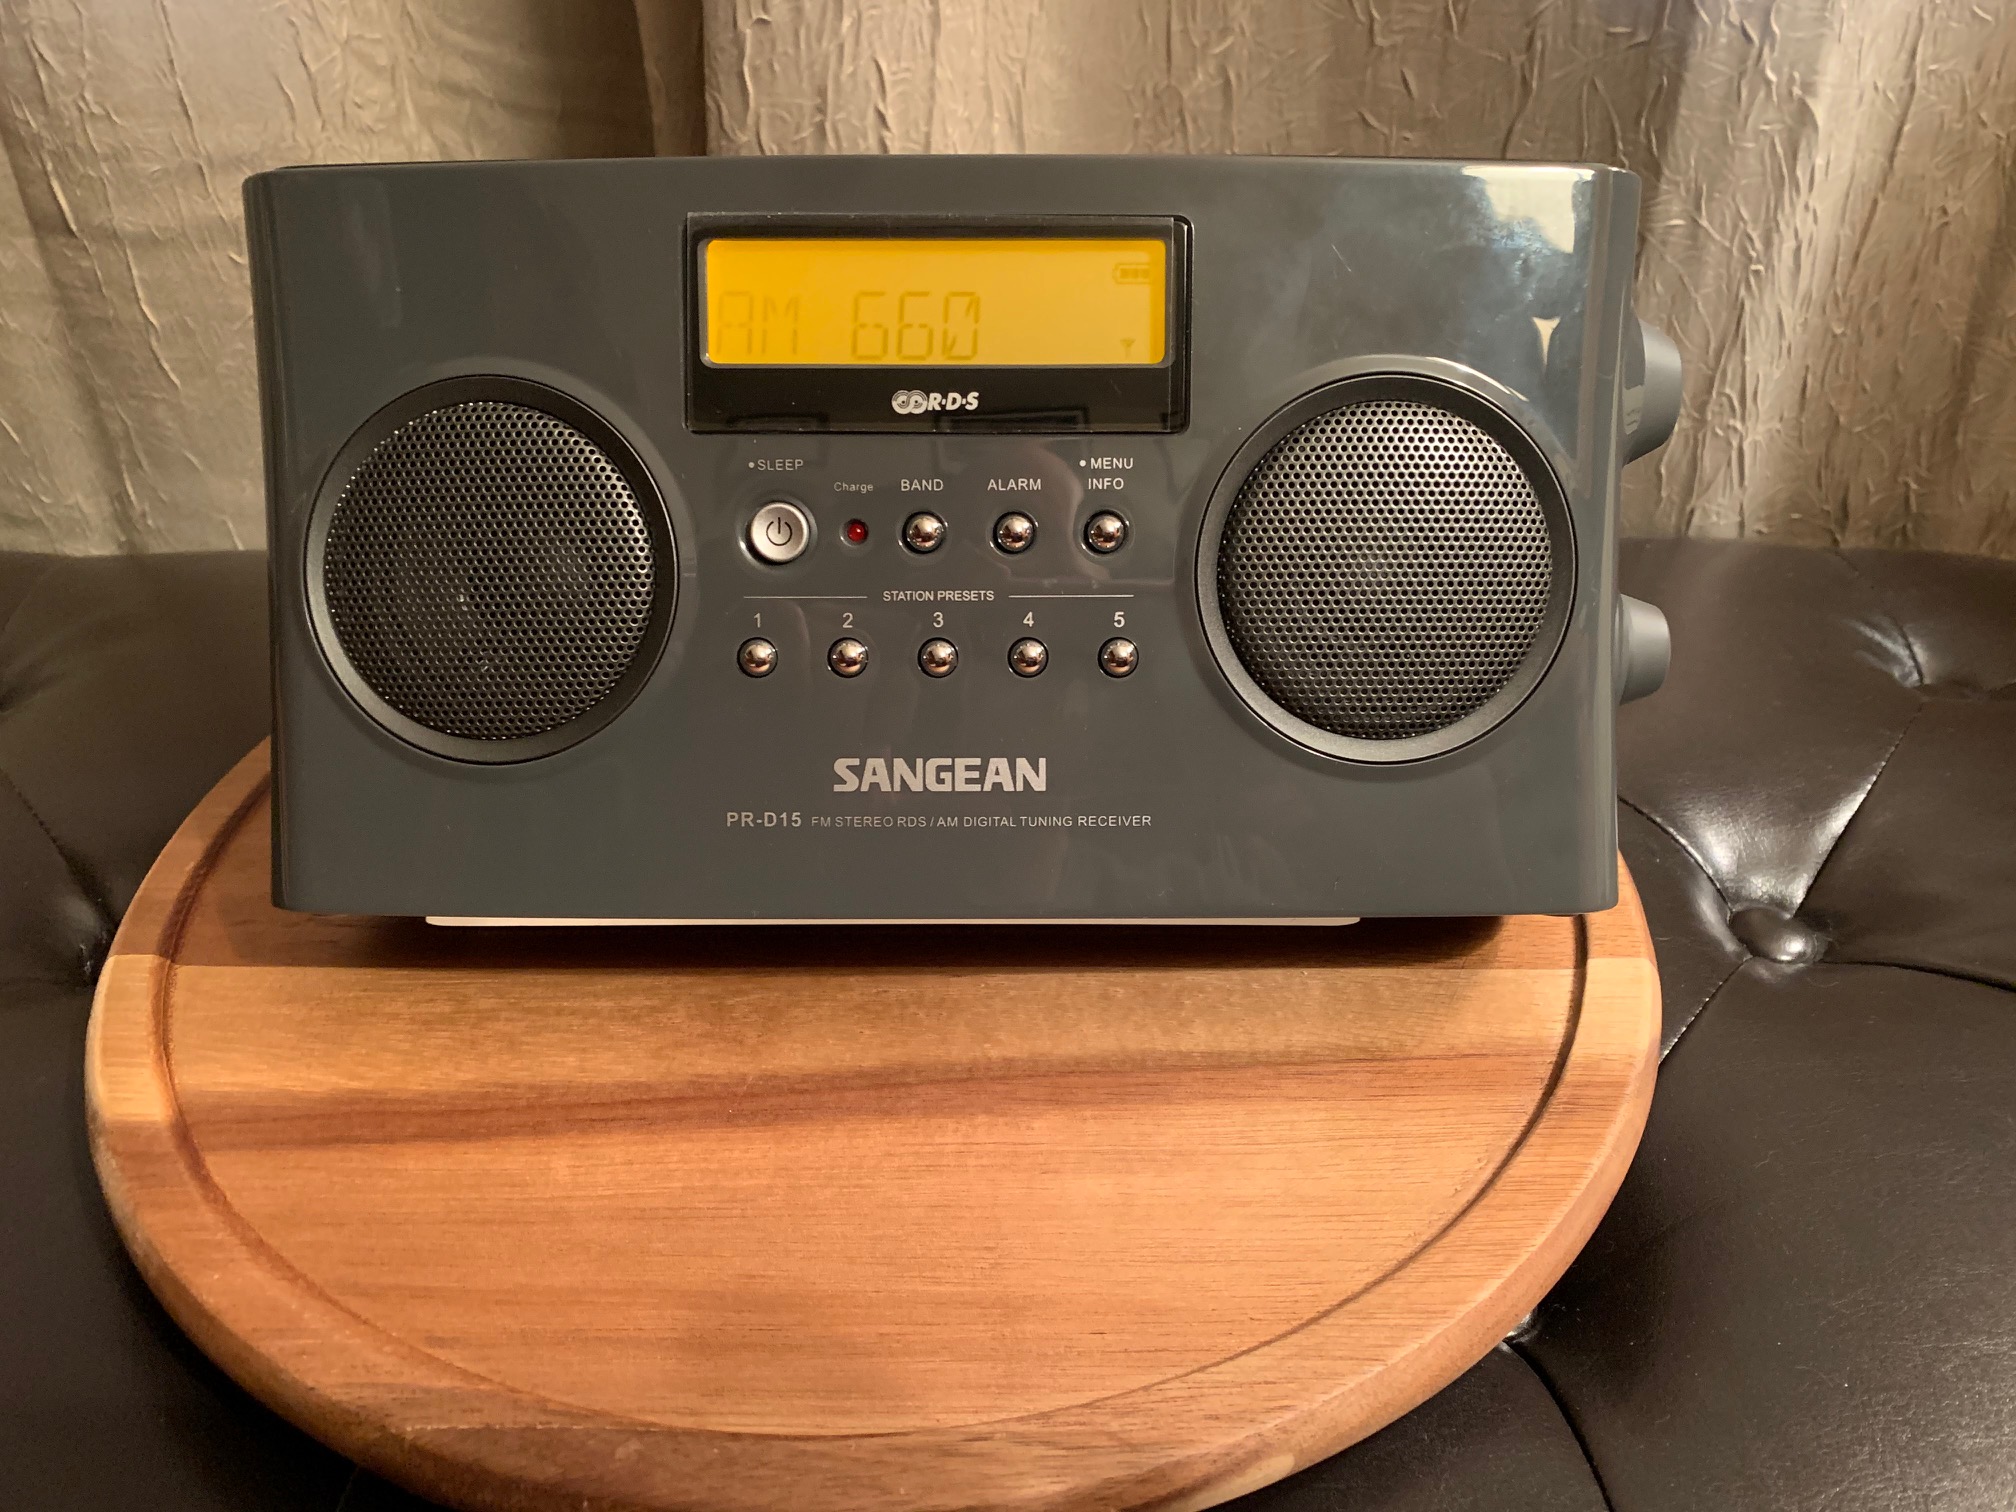 Dan's first impressions of the new Sangean ATS-909X2